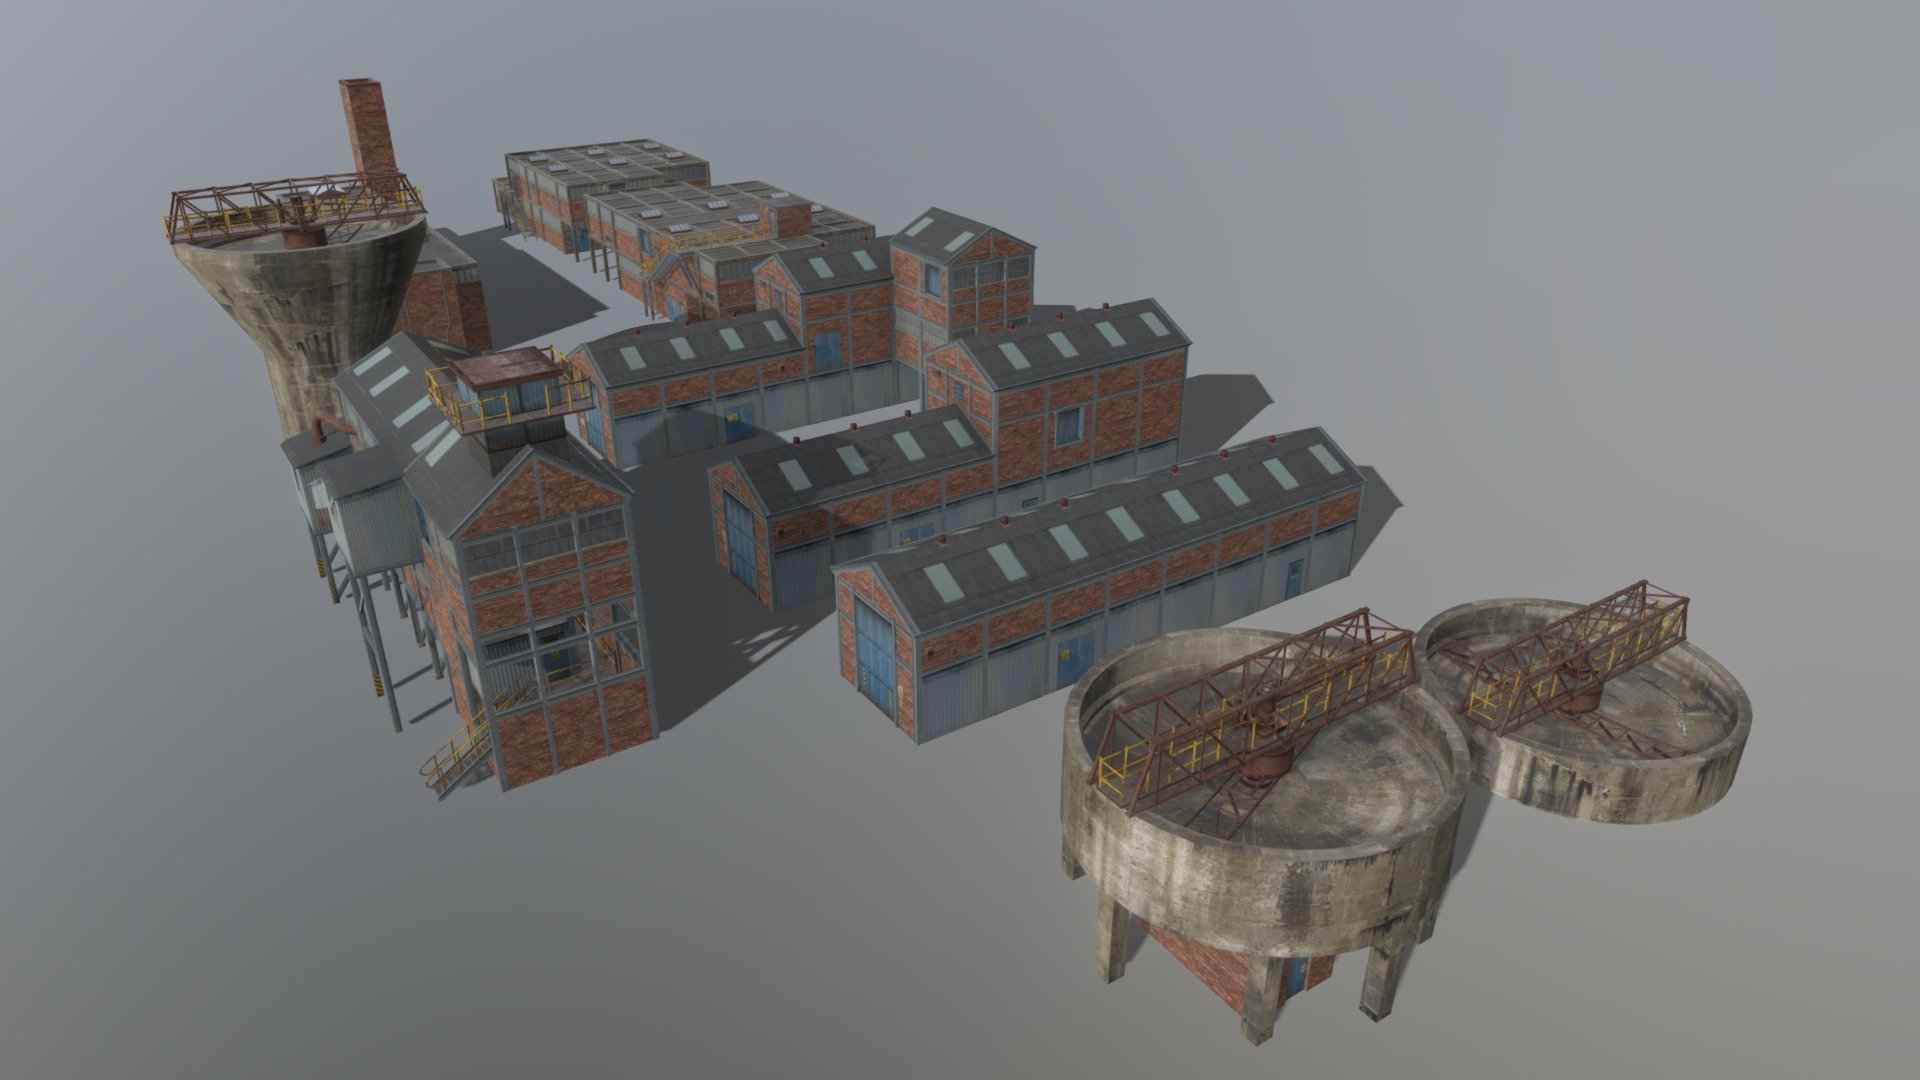 A set of processing buildings for a mining works. They were designed for viewing at a distance for background scenery, RTS games, aerial views, etc. All meshes share a single 4096x4096 texture set and have reasonably low tri/vert counts for realtime use. 

10 buildings are included -  3 screen/processing buildings, wash house, 3 wash tanks, 2 garages, bath house/lockers.

There is a full collection including sets of other mining buildings 3d model